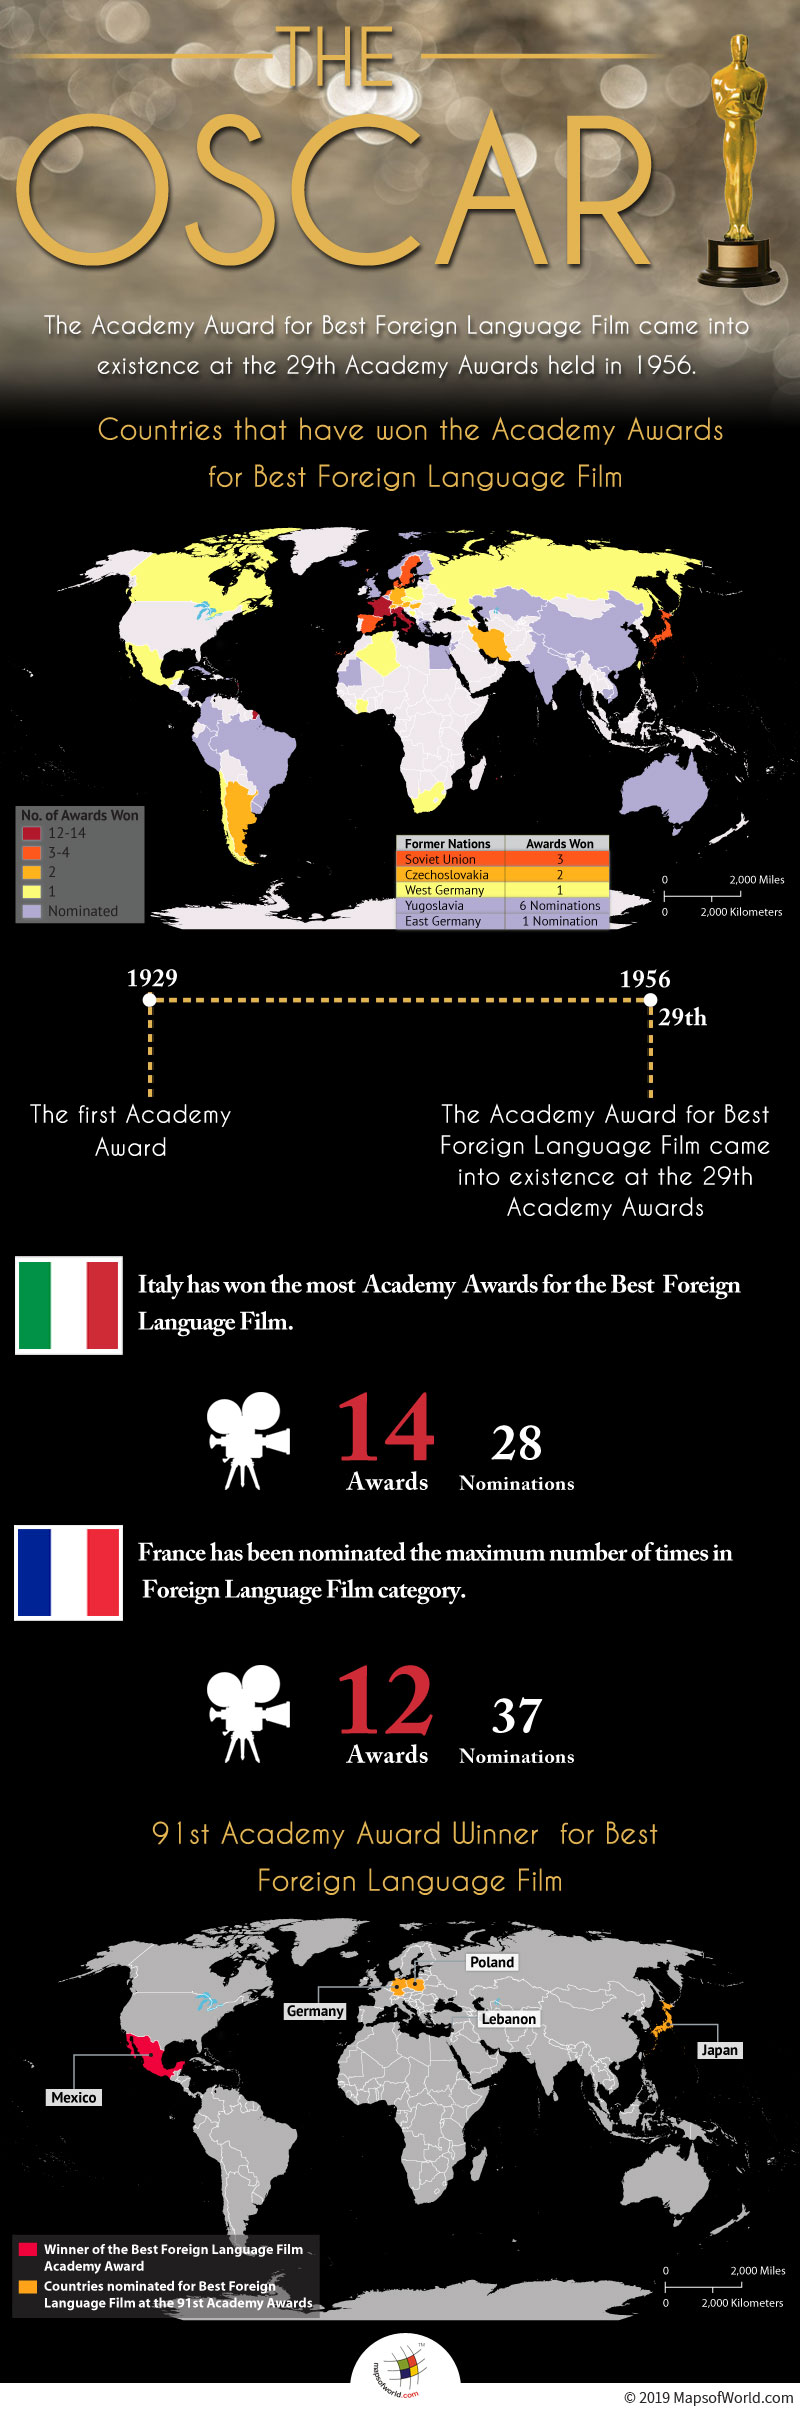 Infographic Showing Details of Academy Award Winning Countries for Best Foreign Language Film